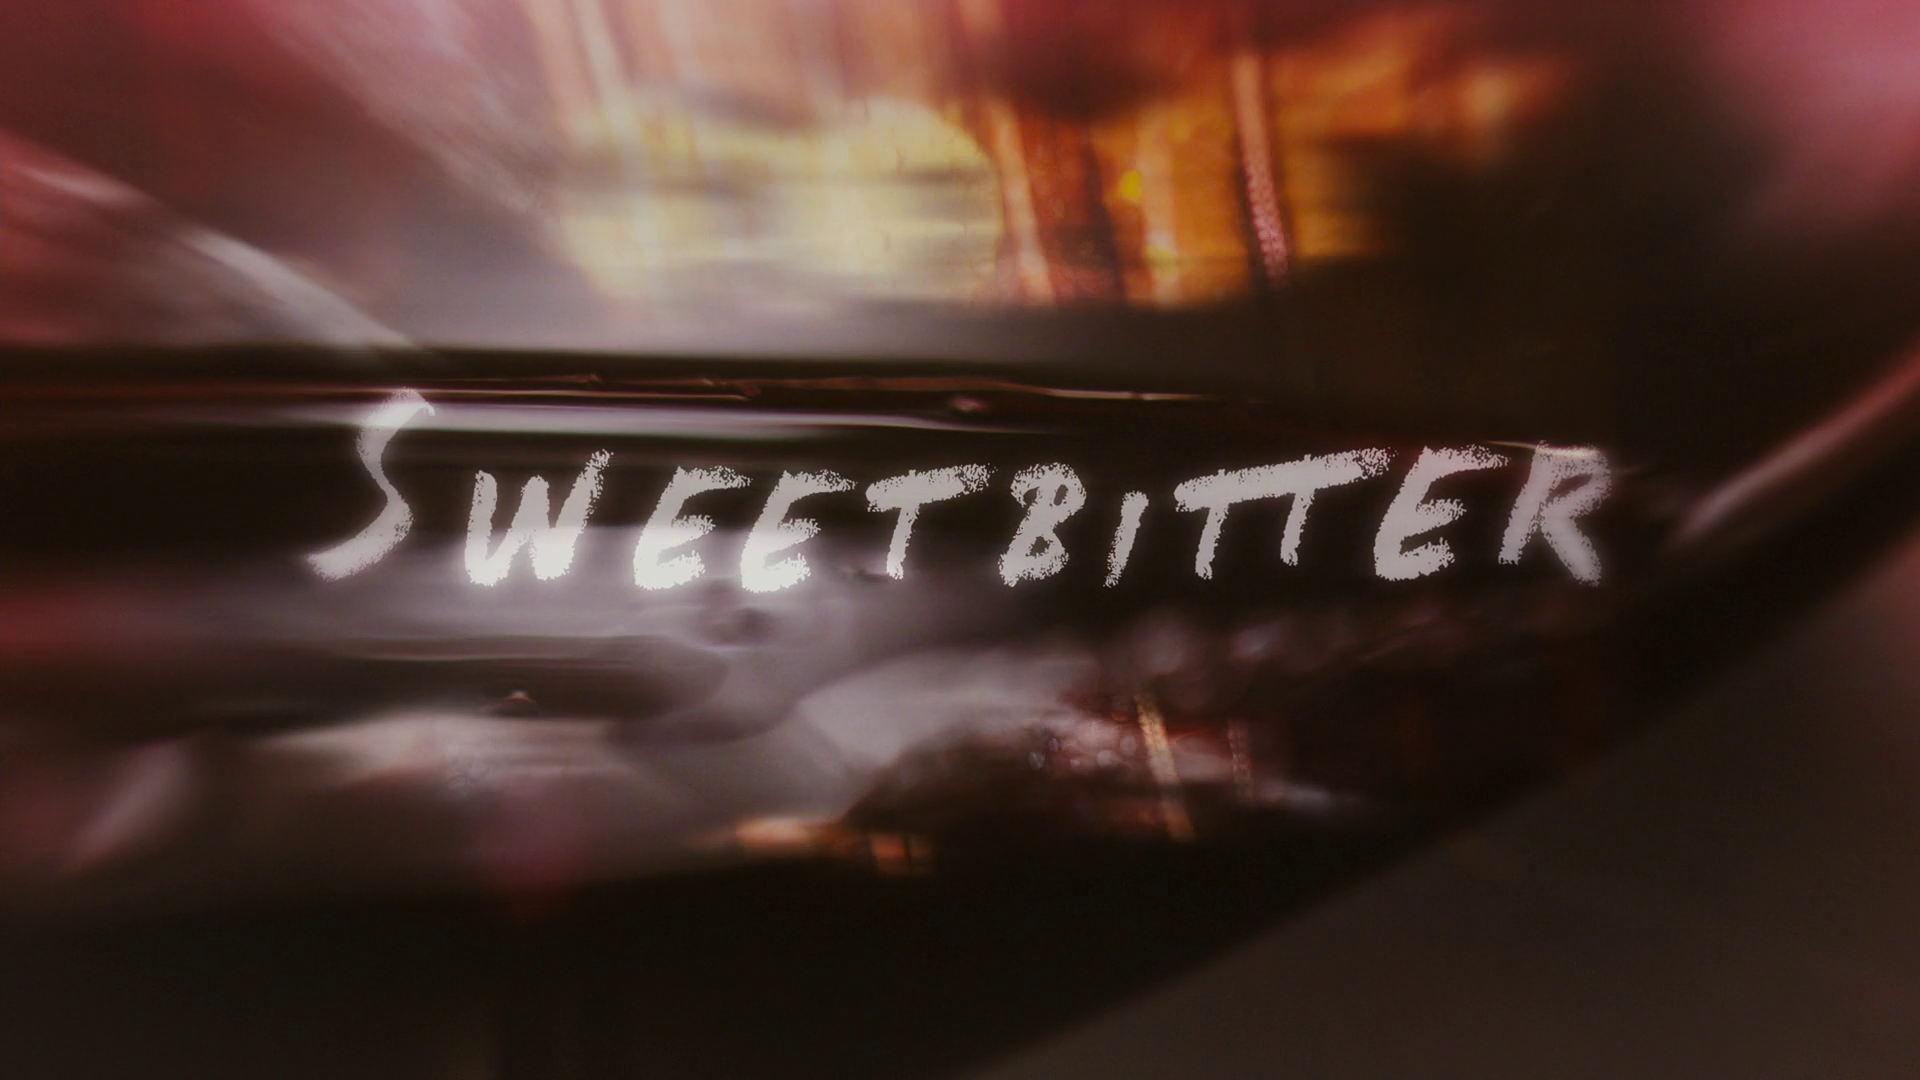 Sweetbitter S01 1080p WEB-DL Dual